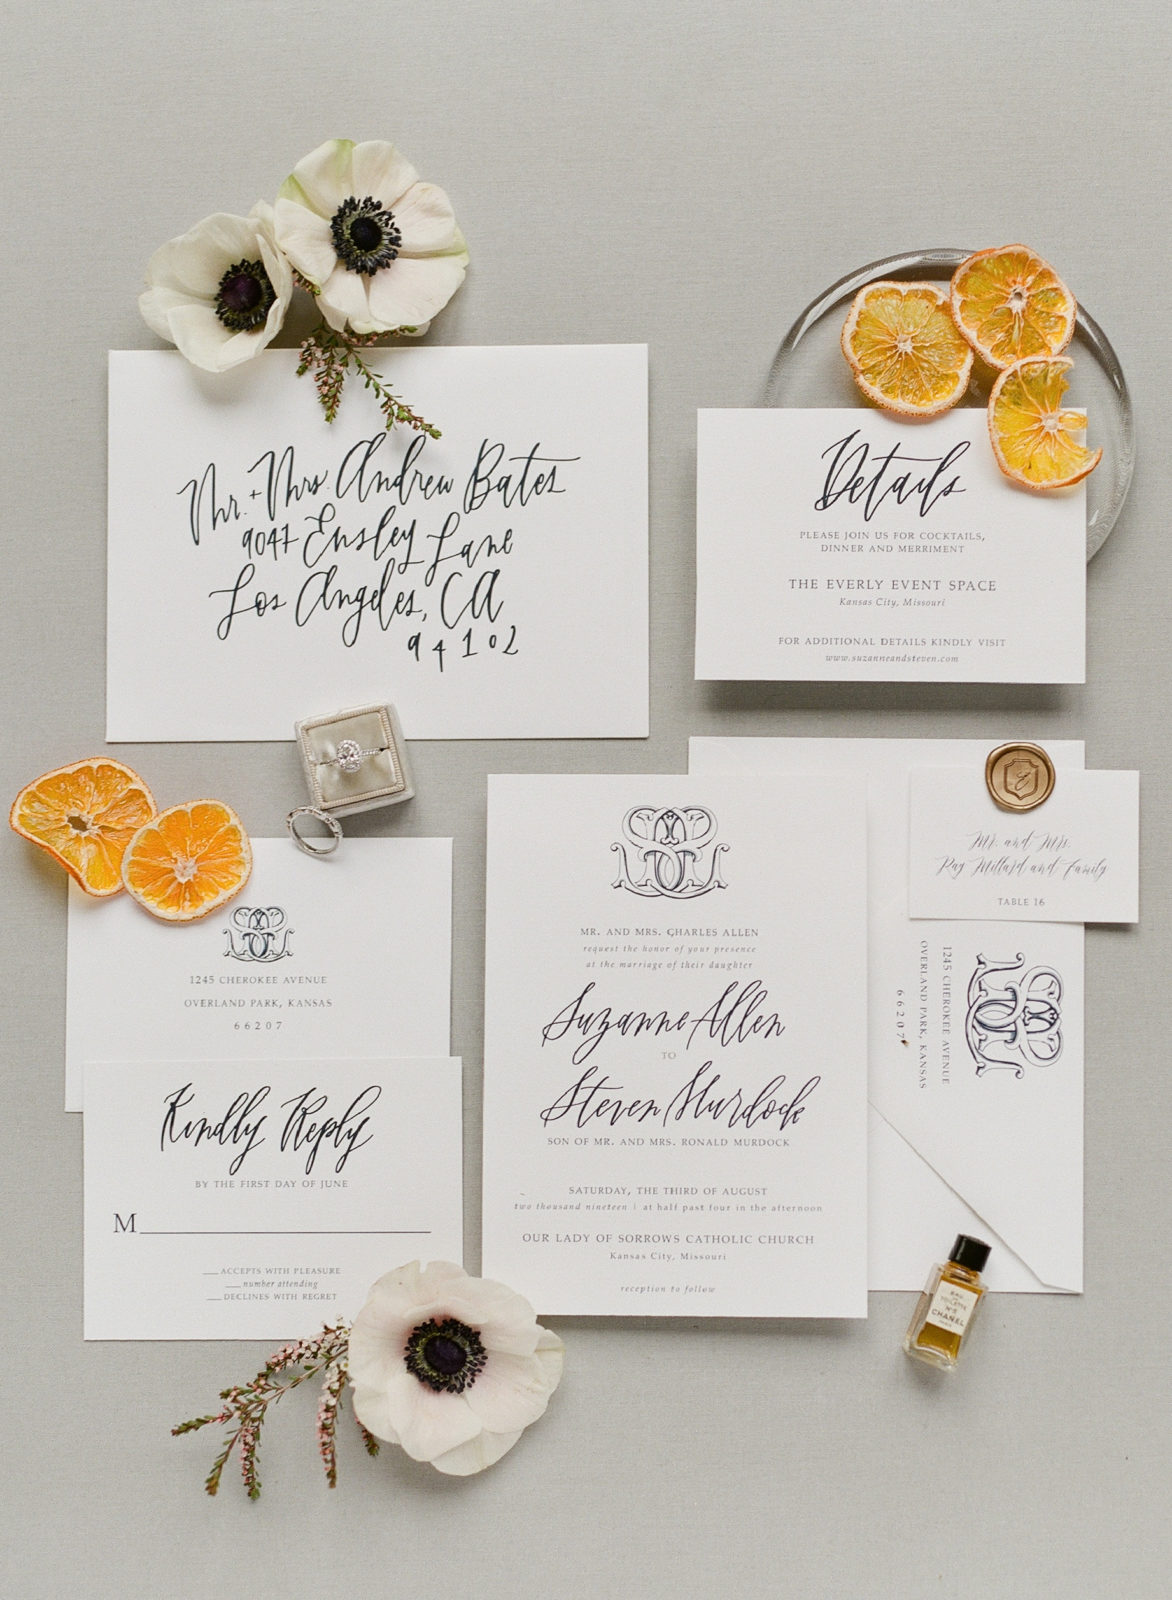 Stationery-by-Nellie-Sparkman-Stationery-Studio-at-The-Wedding-Experience-|-Planning-and-Stationery-by-Nellie-Sparkman-|-Floral-by-Blue-Bouquet-KC-Wedding-Florist